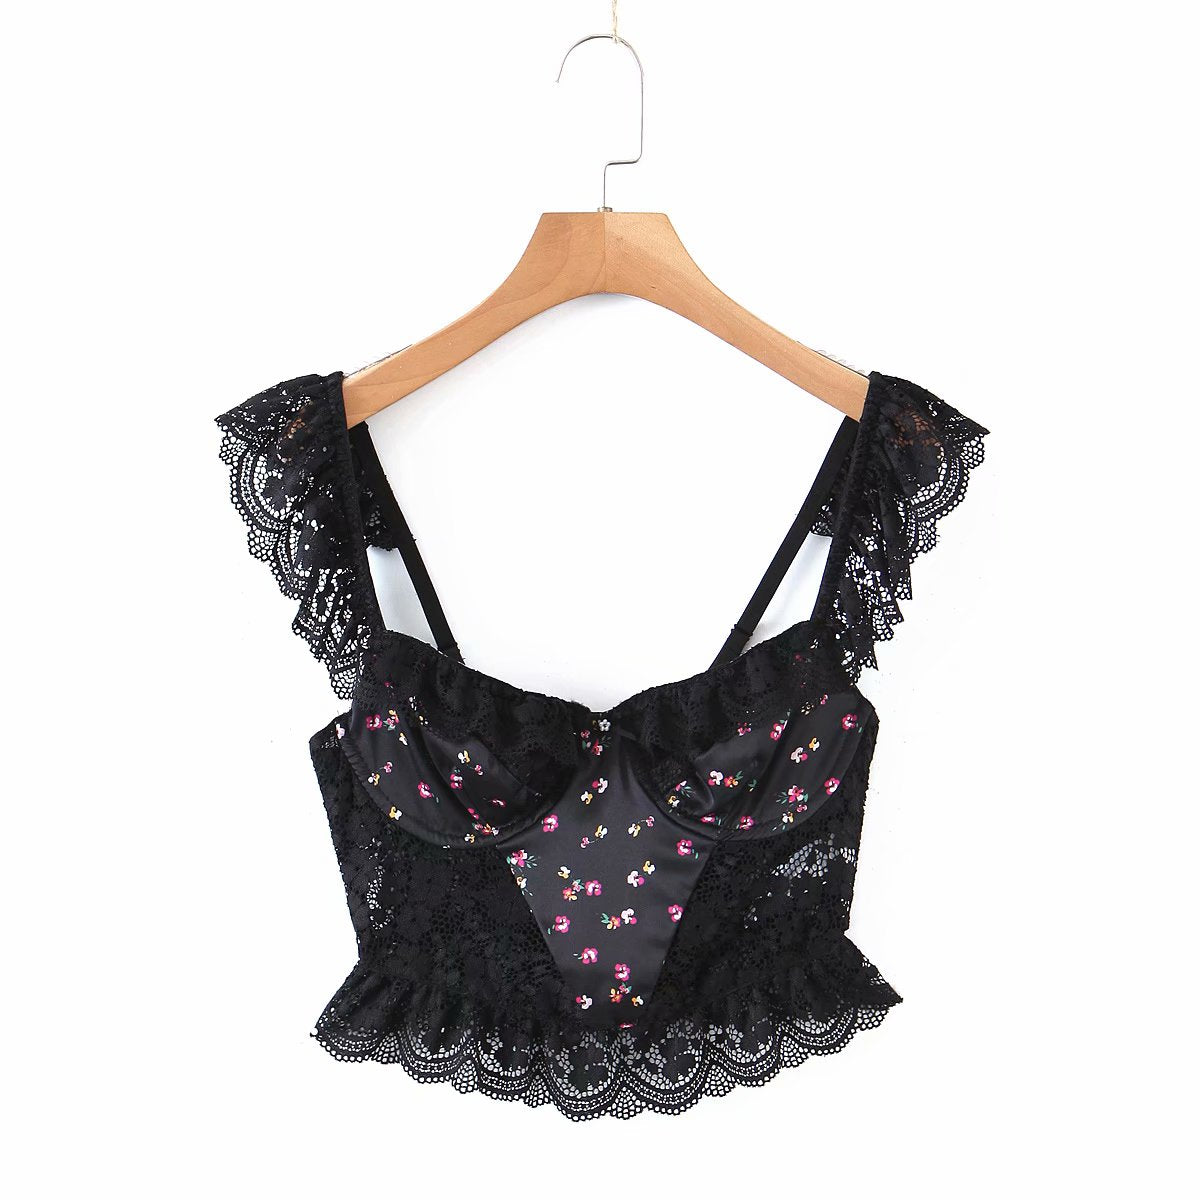 OOTDGIRL Romantic Lace Patchwork Crop Top Women Back Hollow Out Sleeveless Sexy Tank Top Vintage Black Fashion Summer Tops